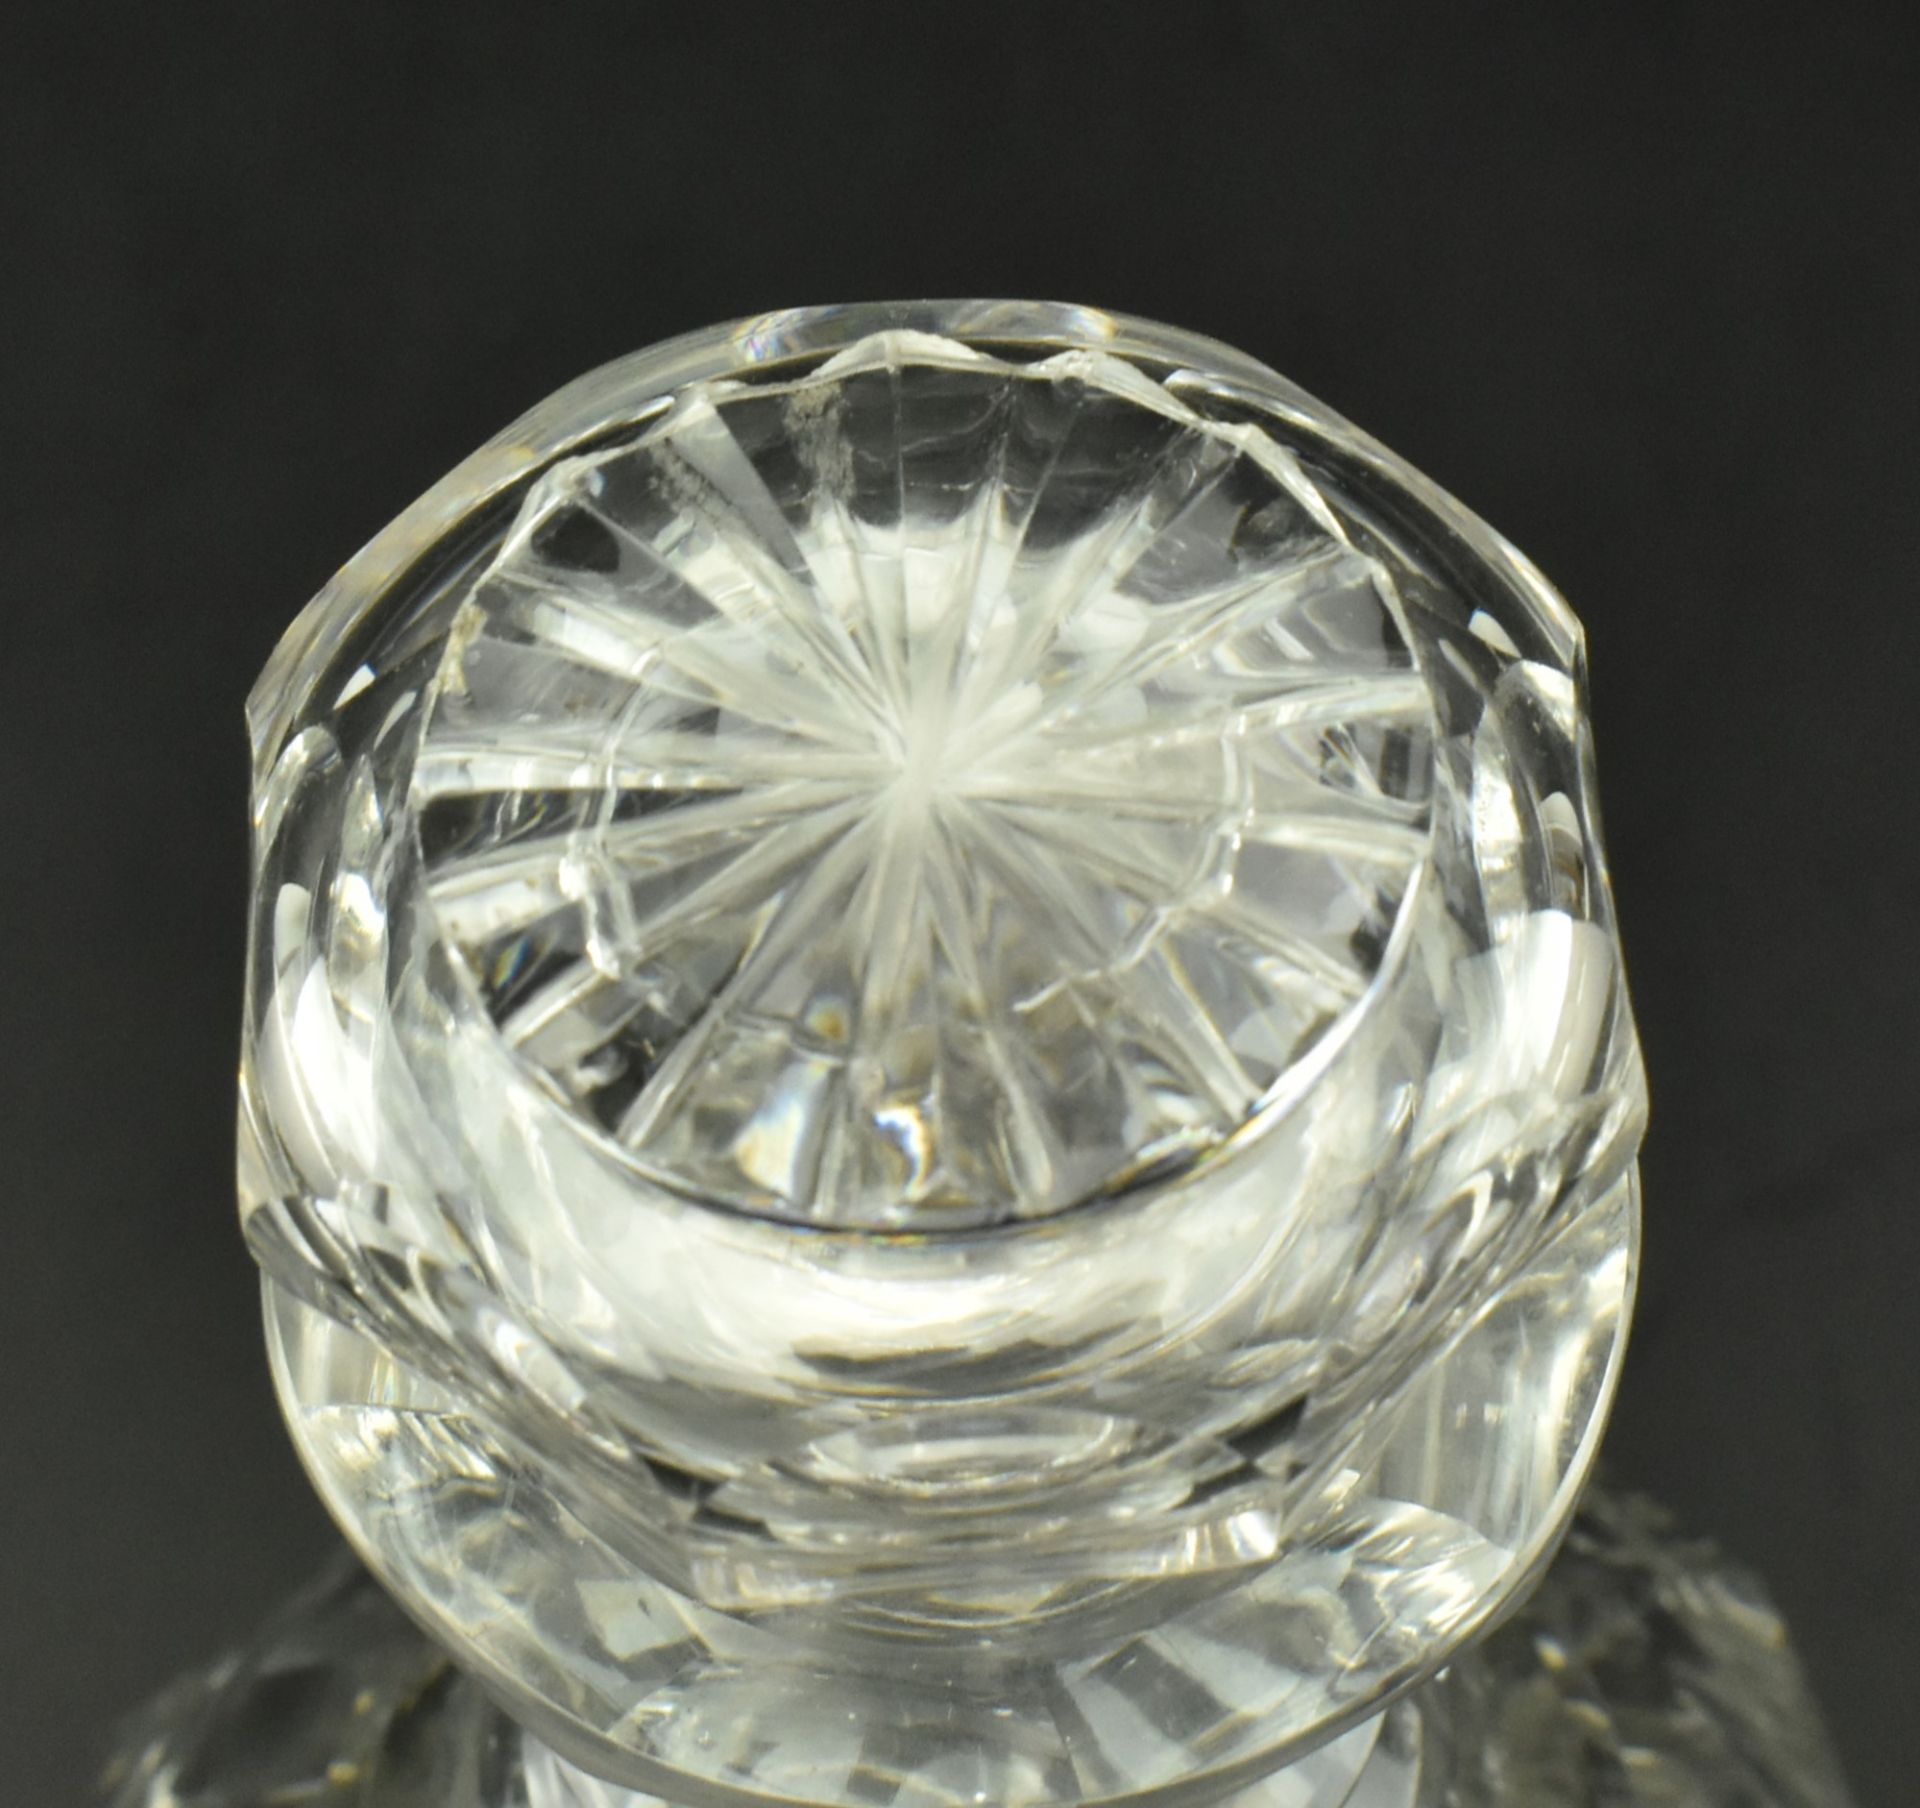 EARLY 19TH CENTURY HEAVY GLASS DECANTER, HOLLOW STOPPER - Image 2 of 8